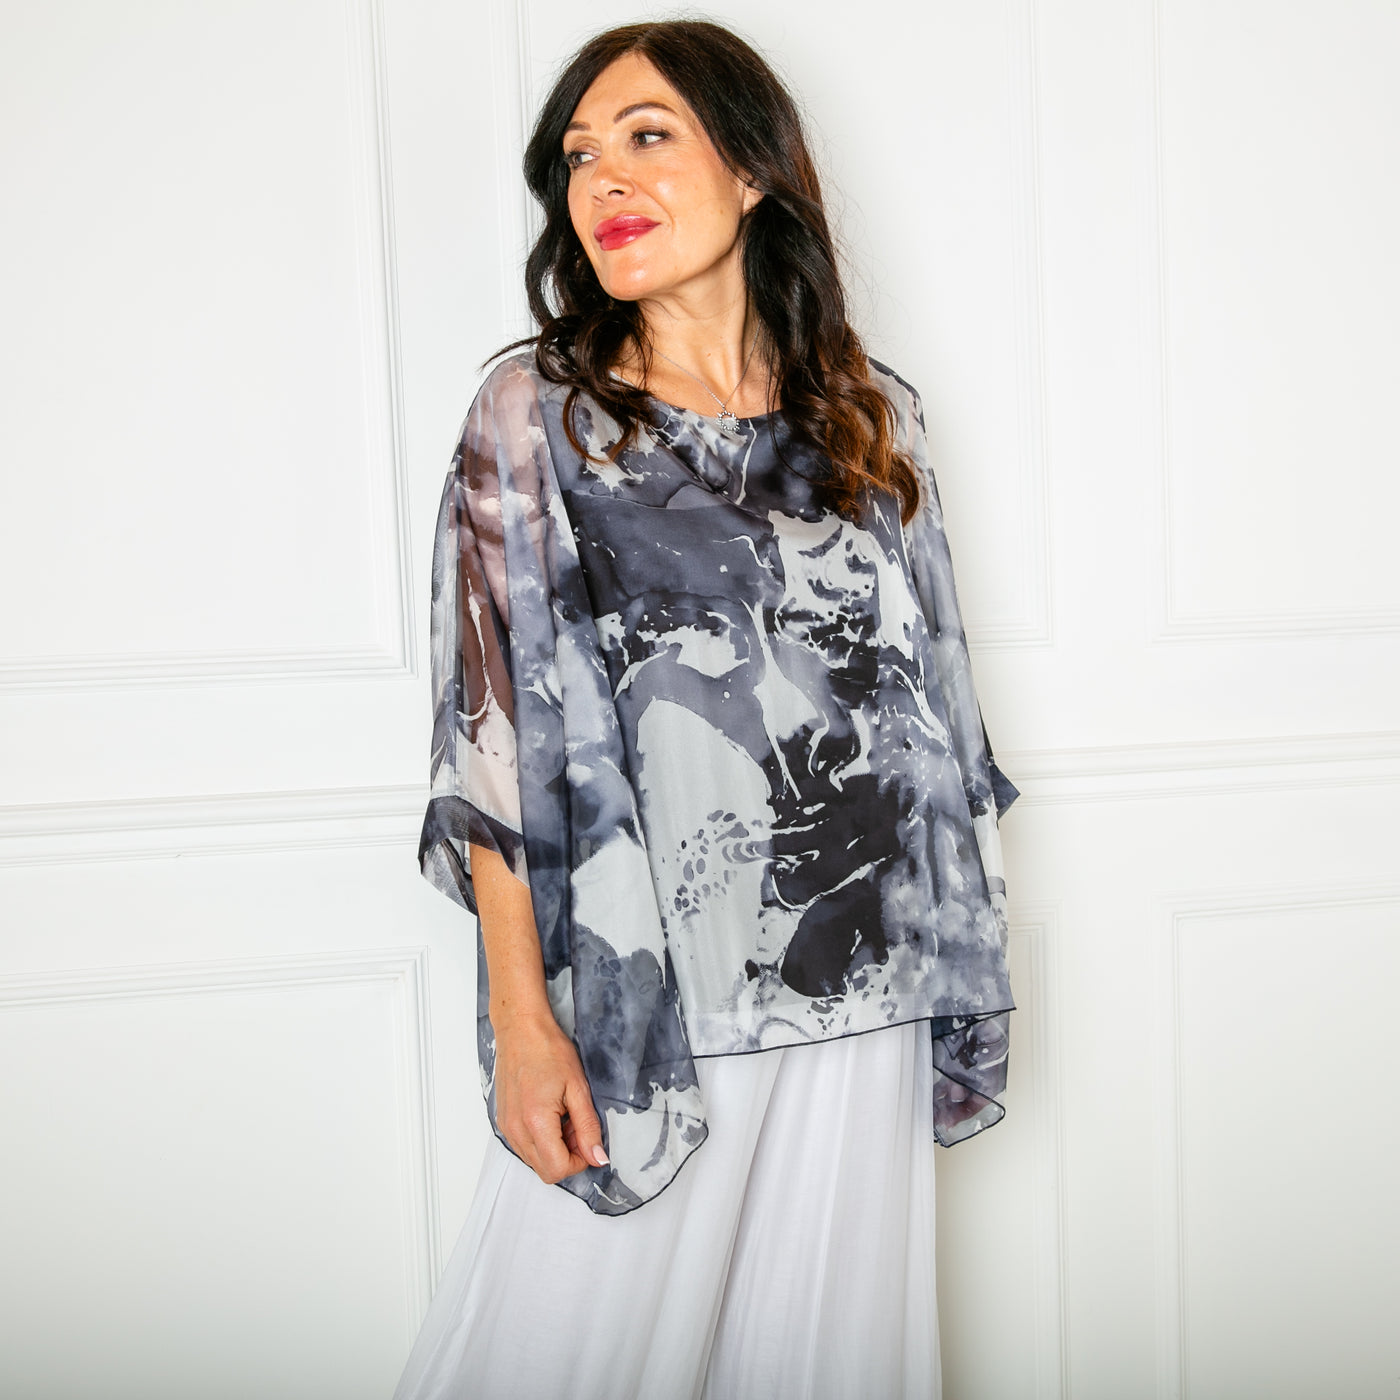 The charcoal grey Ink Blot Blouse with a round neckline and big dropped sleeves